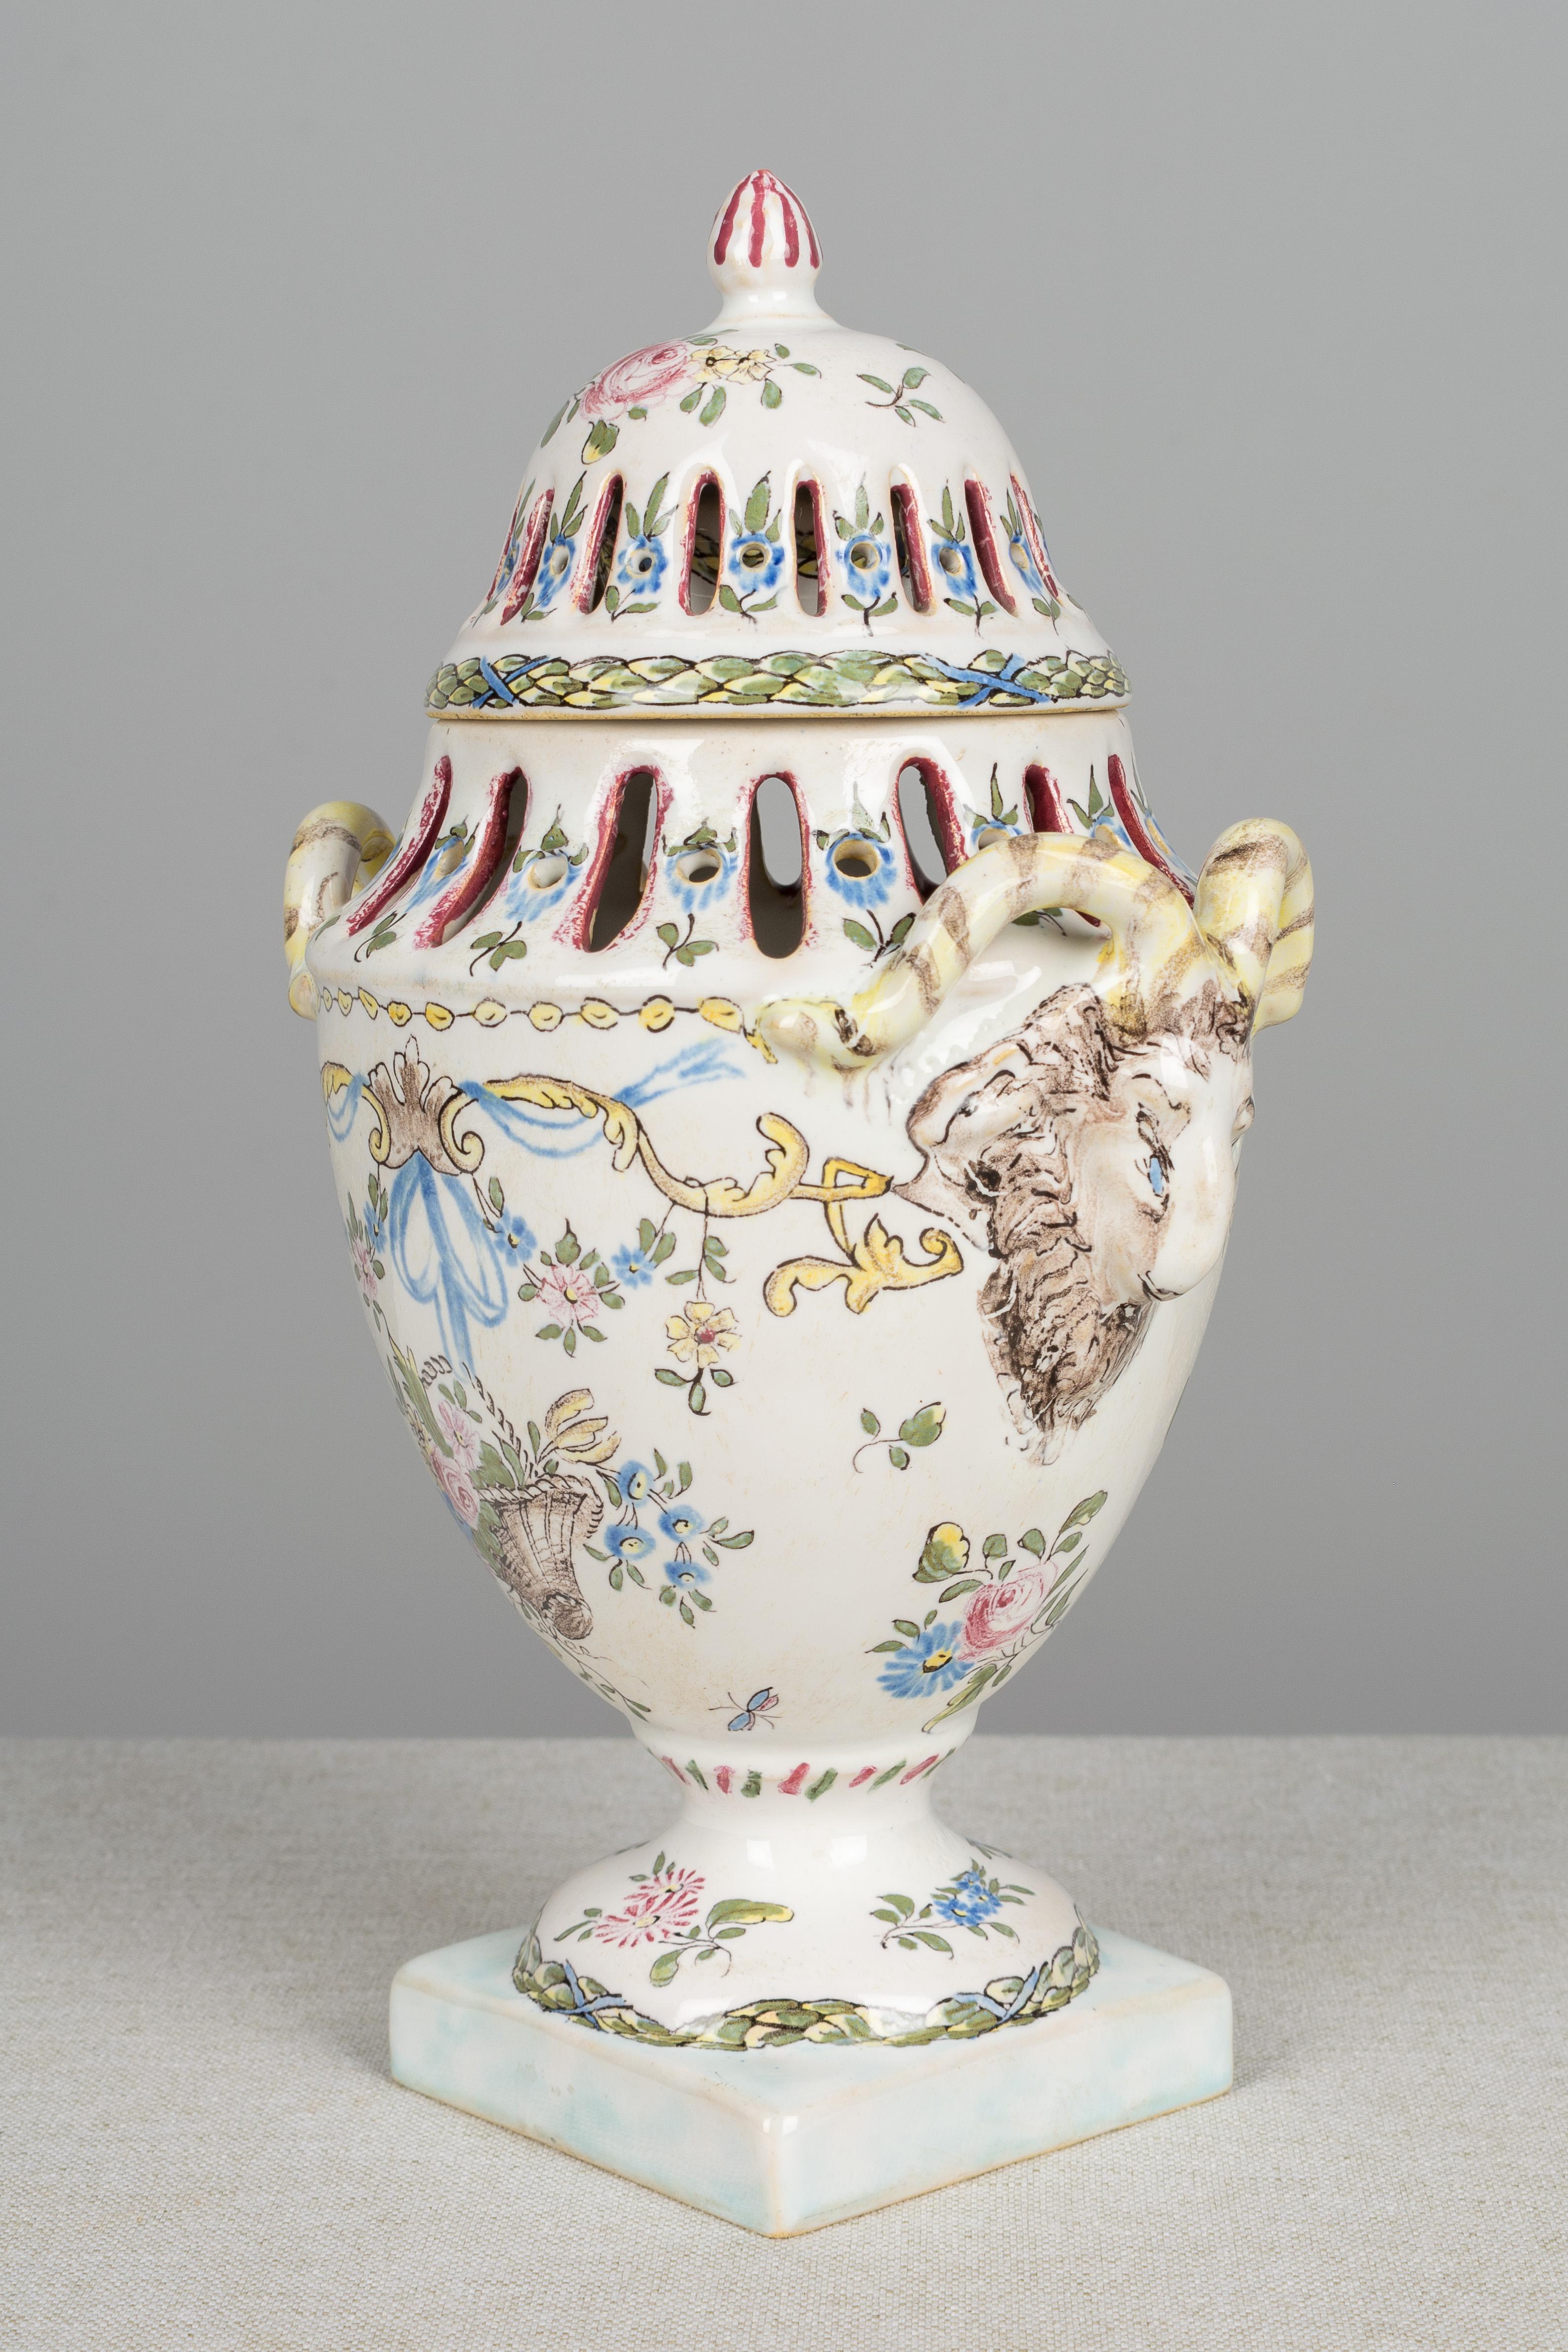 French Provincial 18th Century French Faience Potpourri Urn